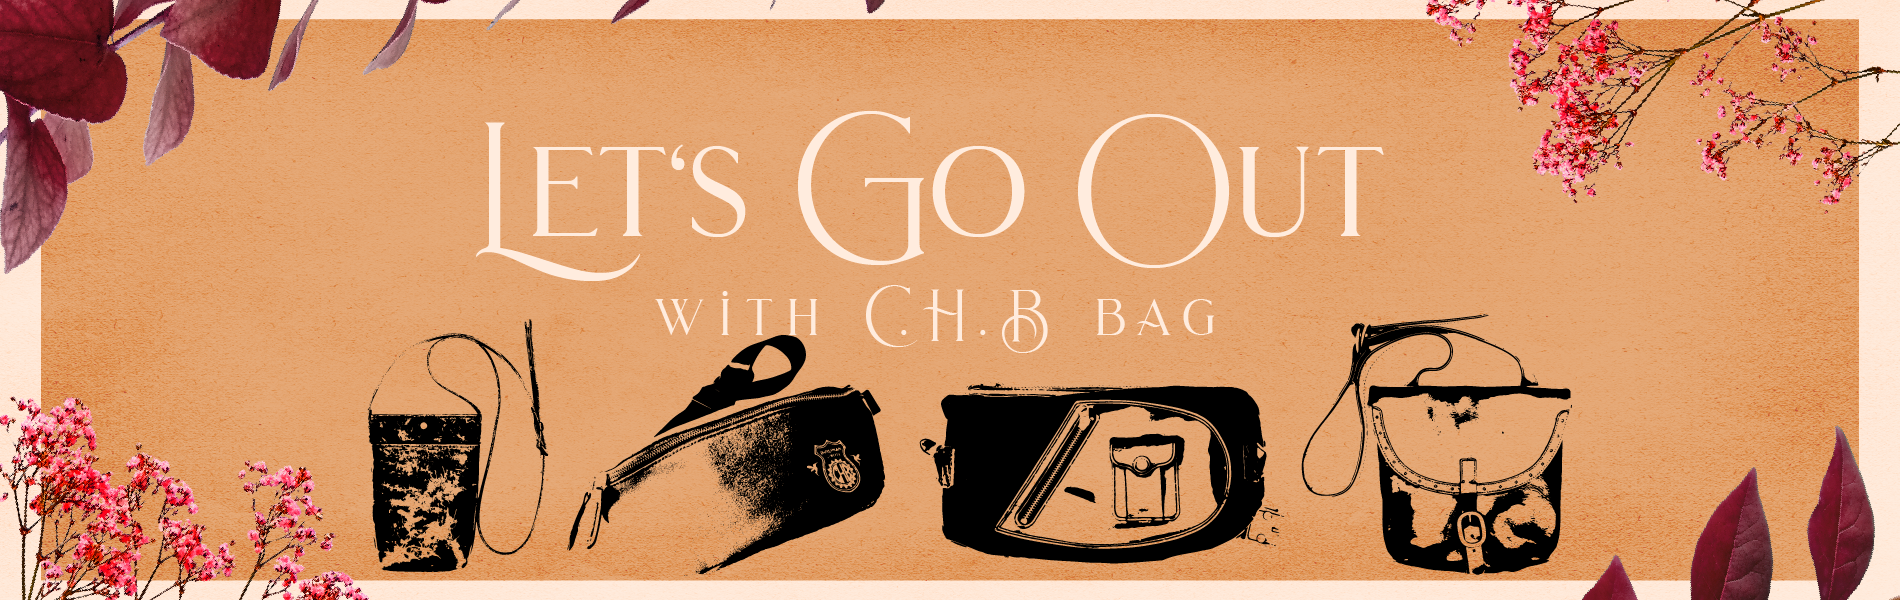 Let's Go Out with C.H.B Bag